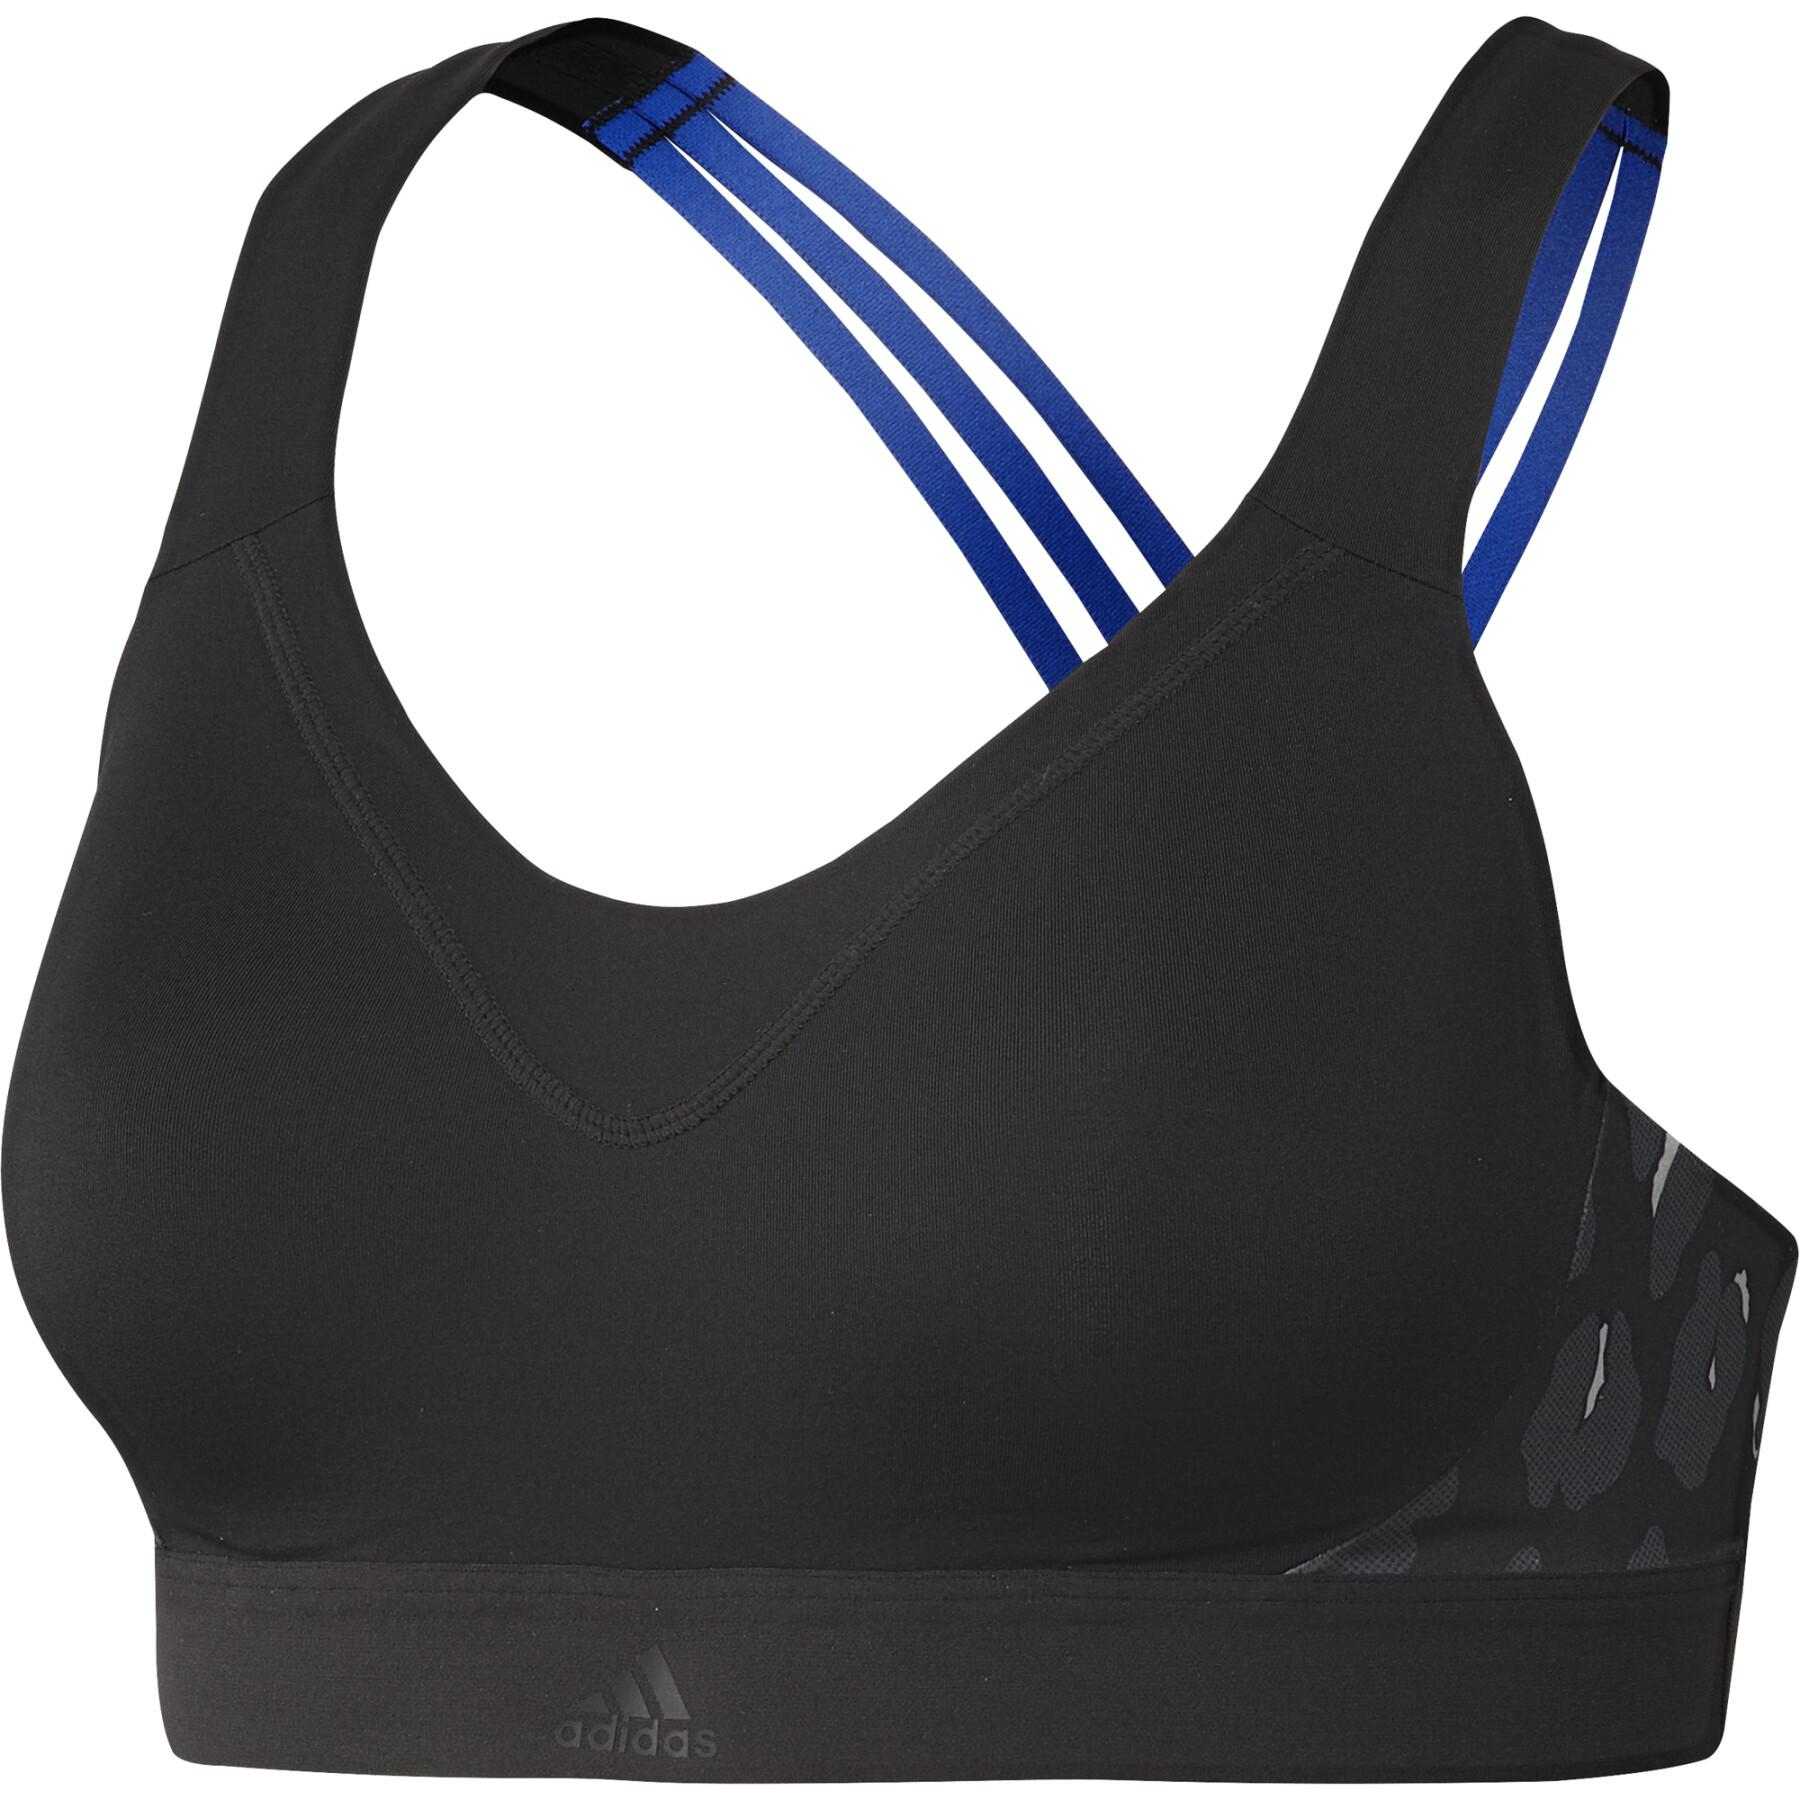 Women's bra adidas Stronger For It Racer Iteration